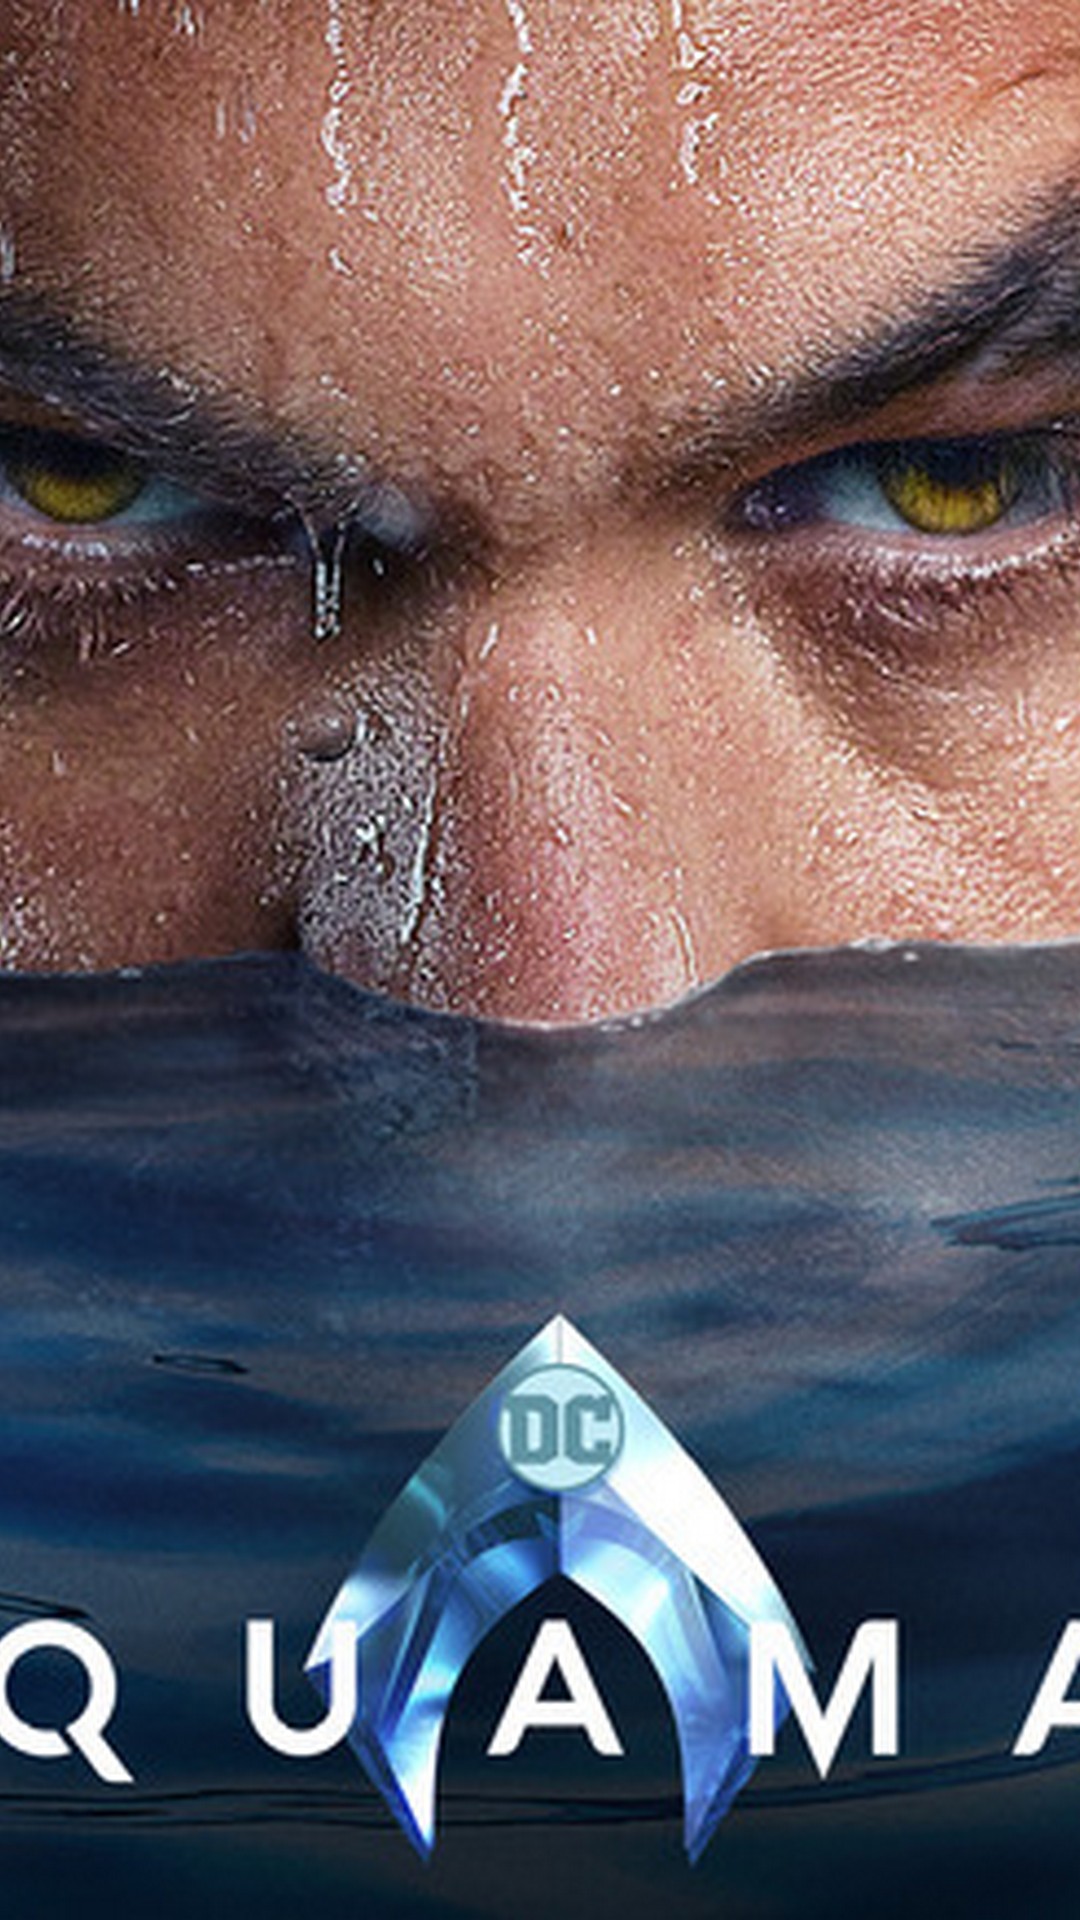 iPhone 8 Wallpaper Aquaman 2018 with resolution 1080X1920 pixel. You can make this wallpaper for your iPhone 5, 6, 7, 8, X backgrounds, Mobile Screensaver, or iPad Lock Screen